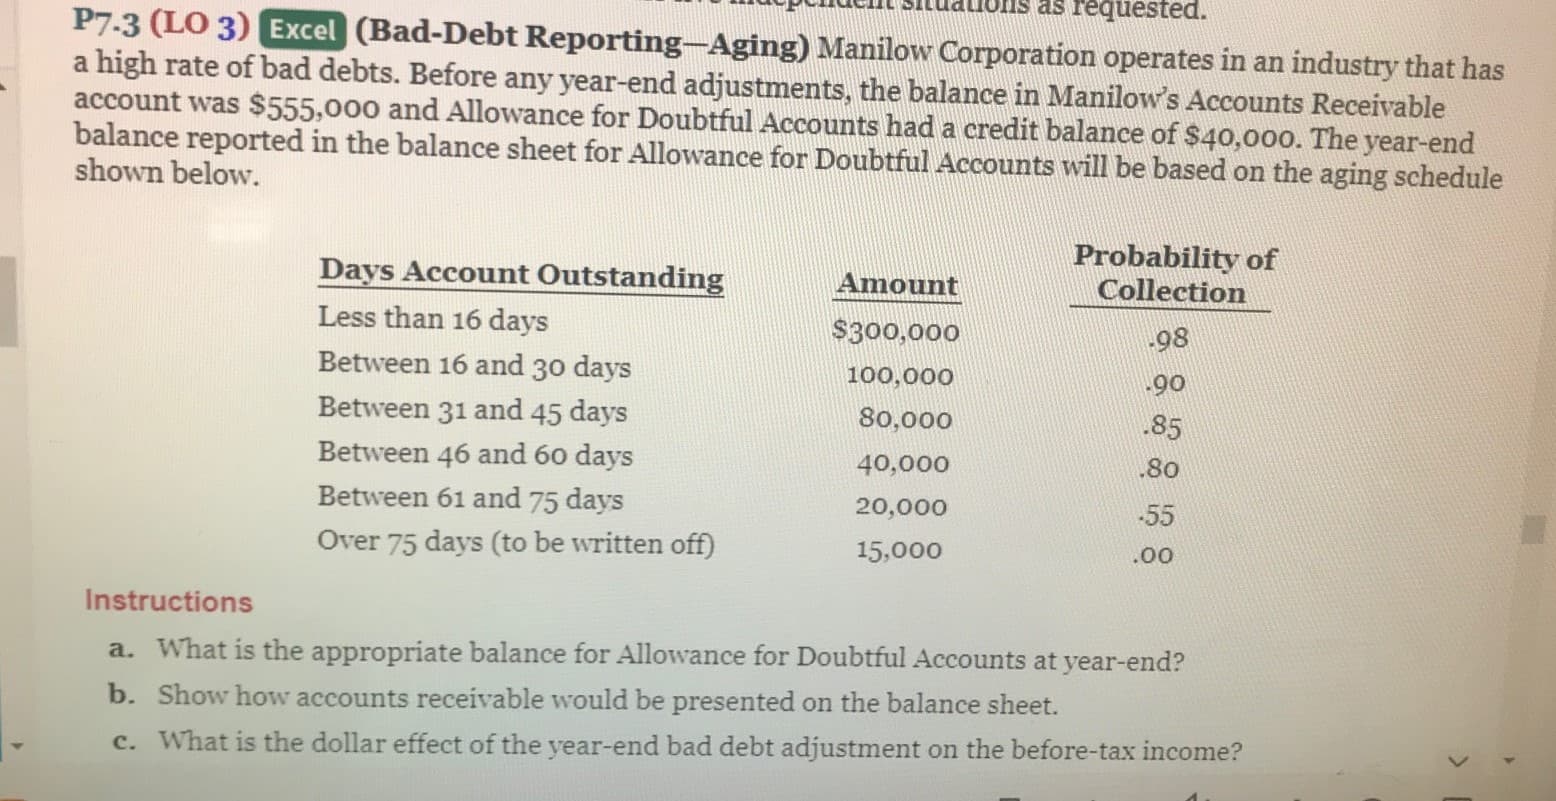 as requested.
P7.3 (LO 3) Excel (Bad-Debt Reporting-Aging) Manilow Corporation operates in an industry that has
a high rate of bad debts. Before any year-end adjustments, the balance in Manilow's Accounts Receivable
account was $555,000 and Allowance for Doubtful Accounts had a credit balance of $40,000. The year-end
balance reported in the balance sheet for Allowance for Doubtful Accounts will be based on the aging schedule
shown below.
Days Account Outstanding
Probability of
Collection
Amount
Less than 16 days
$300,000
-98
Between 16 and 30 days
100,000
-90
Between 31 and 45 days
80,000
.85
Between 46 and 60 days
40,000
80
Between 61 and 75 days
20,000
-55
Over 75 days (to be written off)
15,000
.00
Instructions
a. What is the appropriate balance for Allowance for Doubtful Accounts at year-end?
b. Show how accounts receivable would be presented on the balance sheet.
c. What is the dollar effect of the year-end bad debt adjustment on the before-tax income?
